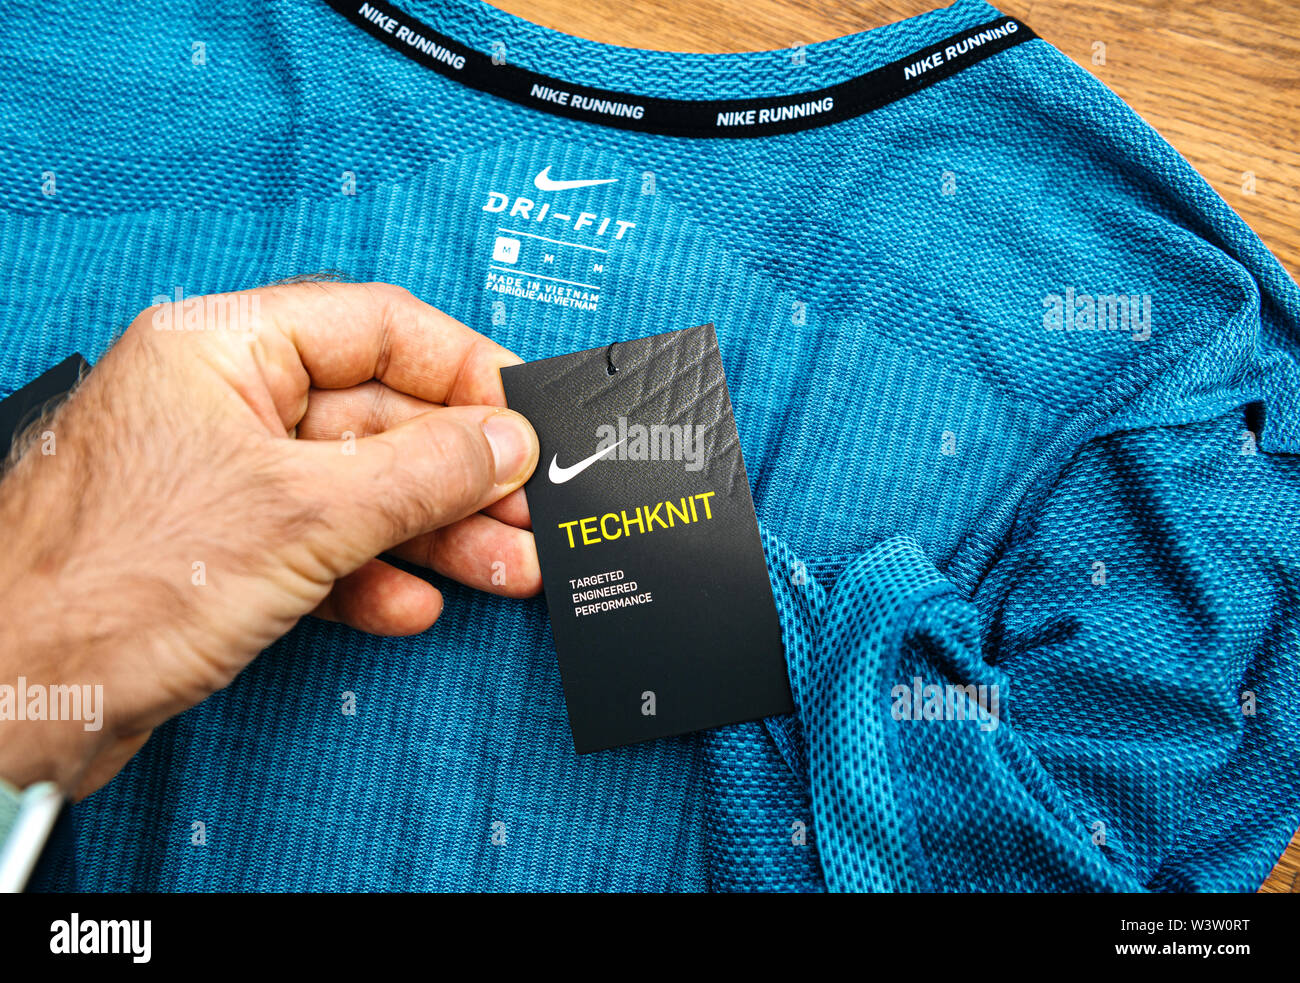 Paris, France - Jul 13, 2019: Man hand POV unboxing unpacking admiring  latest sport clothes equipment for running manufactured byu Nike sportswear  tag with Techknit specification Stock Photo - Alamy